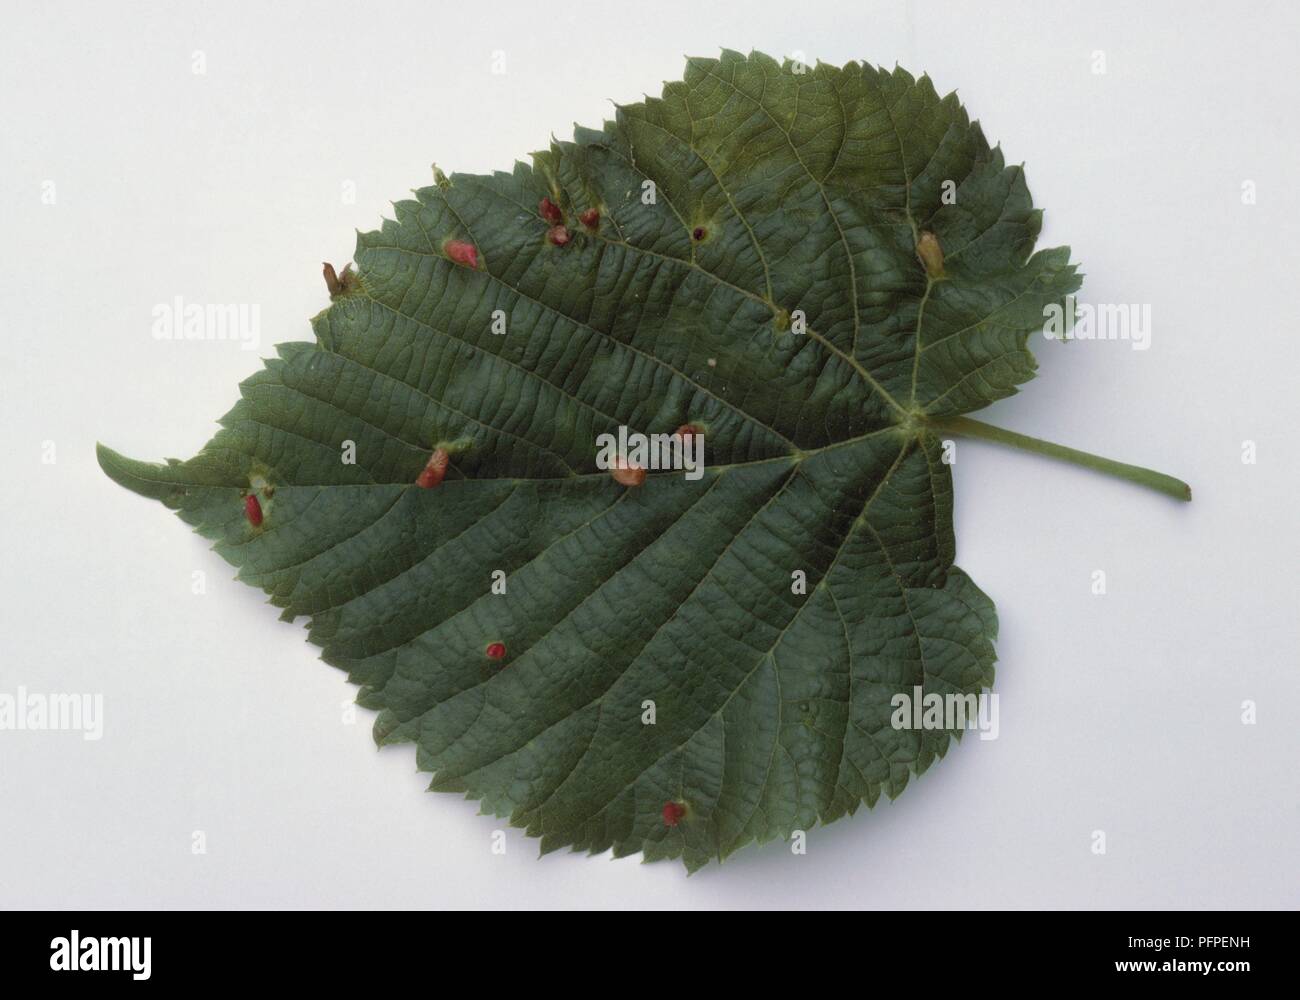 Tilia x europaea (Lime tree) leaf infected with Eriophyes tiliae (Lime nail gall) Stock Photo